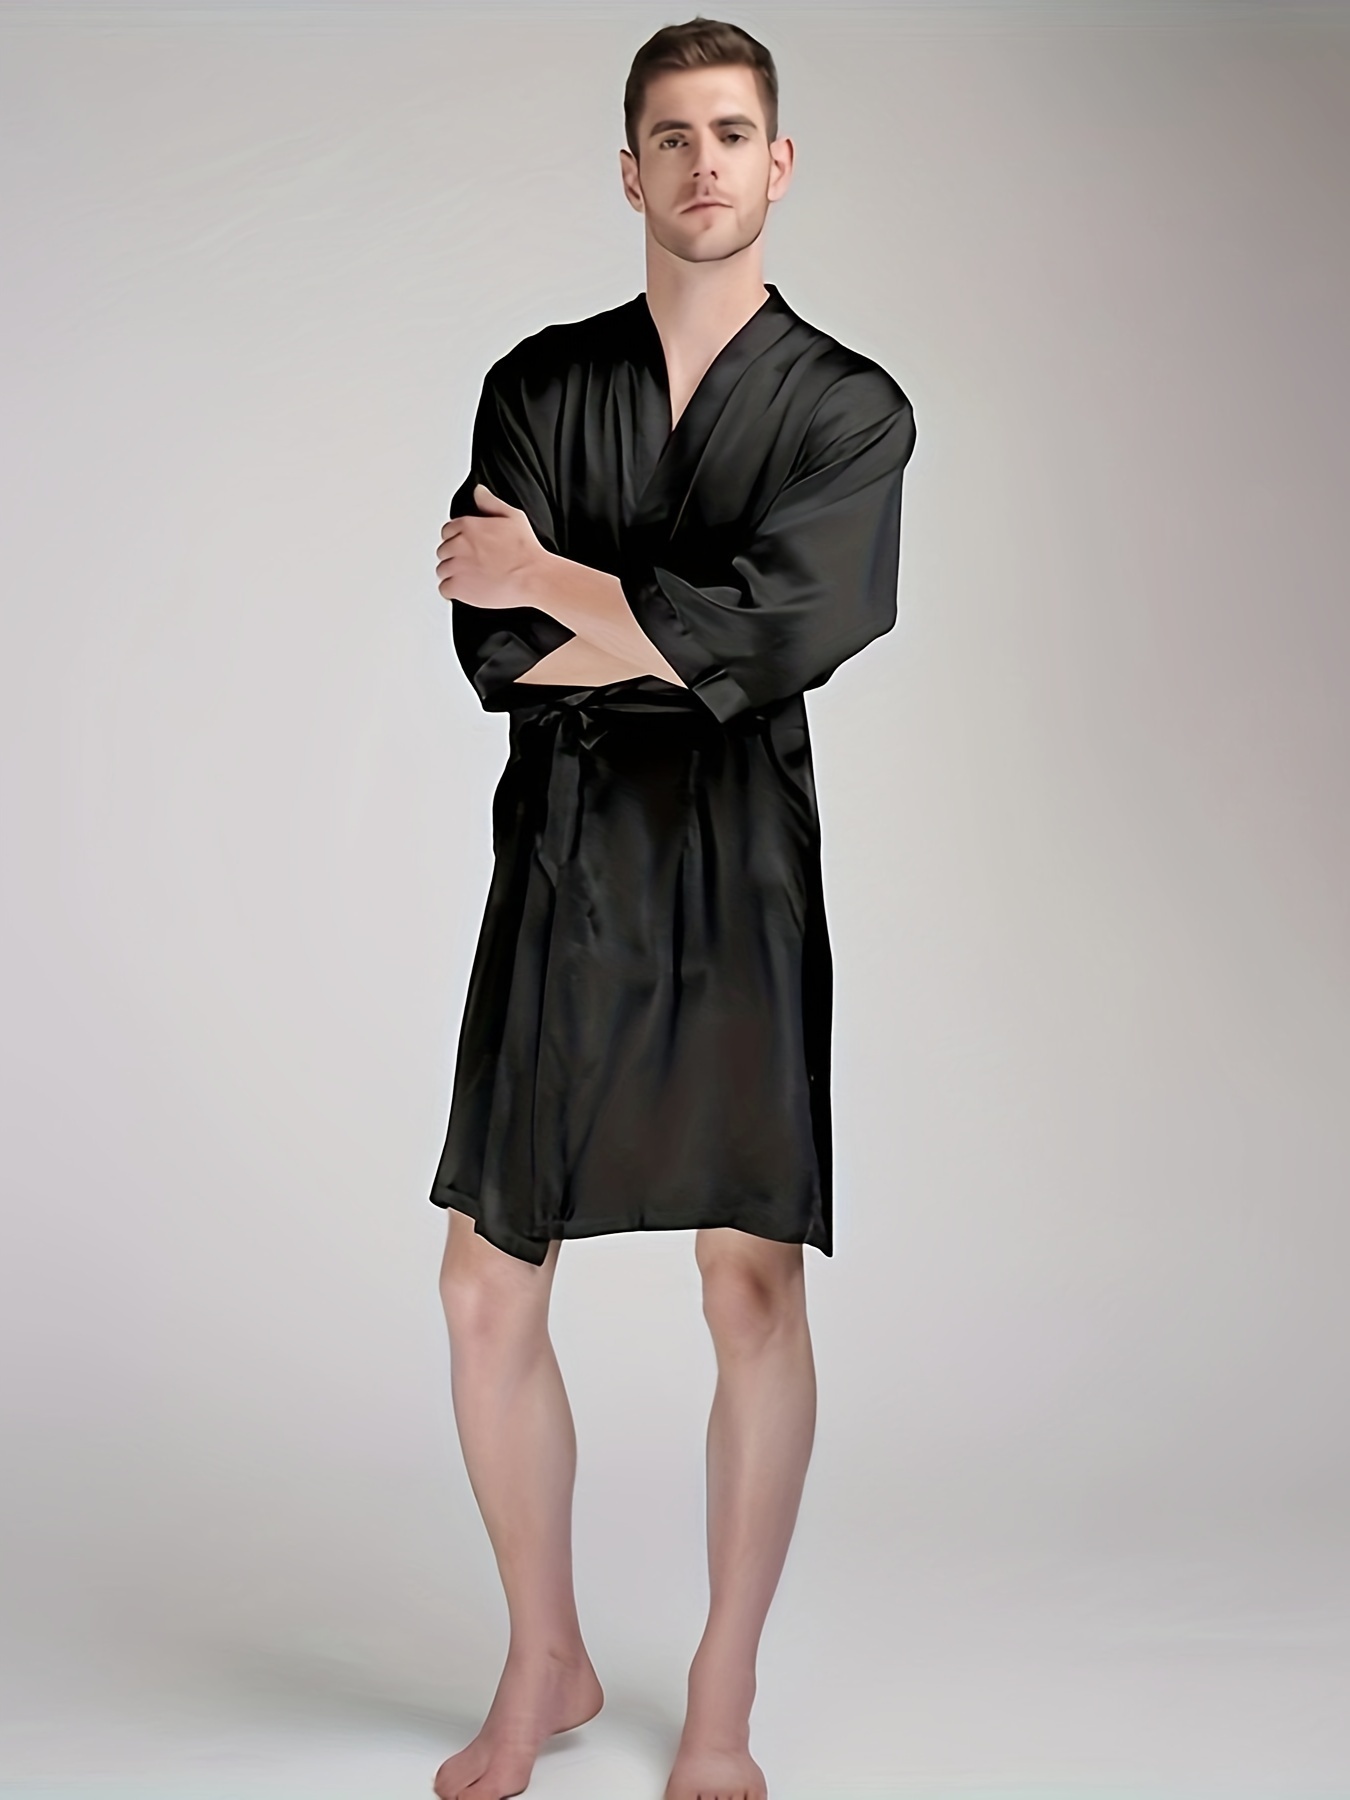 mens solid color bathrobe robe short style soft and comfortable satin pajamas for men